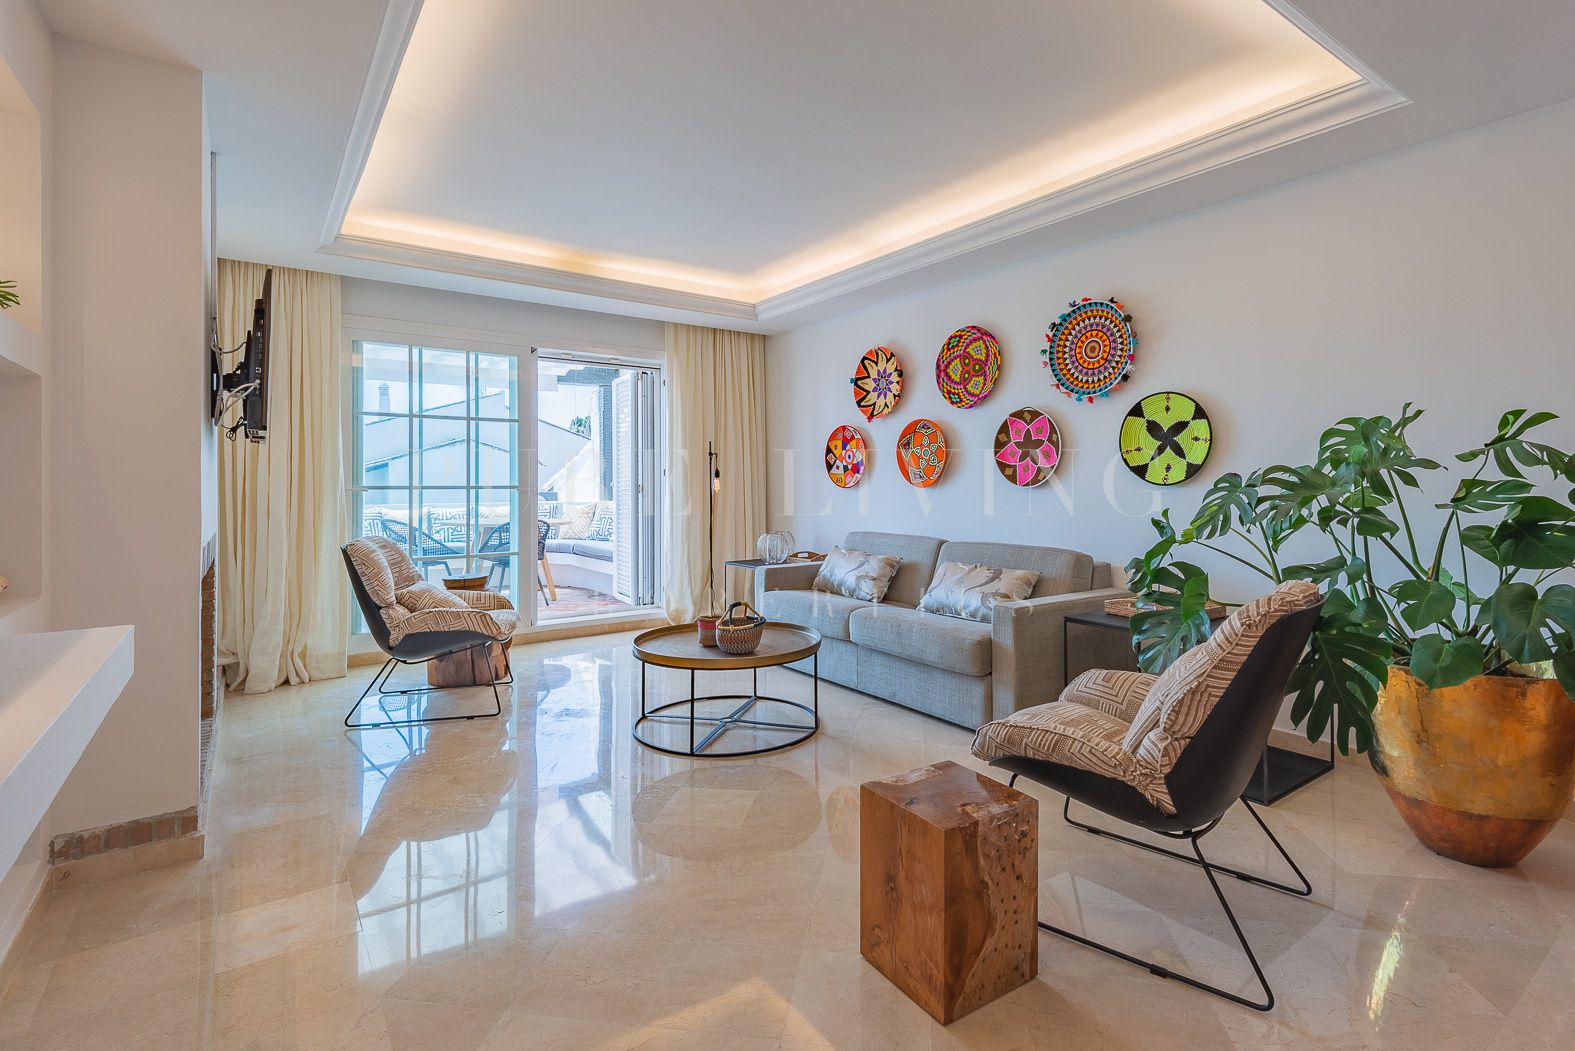 Stunning two bedroom penthouse in Phase II, Puente Romano